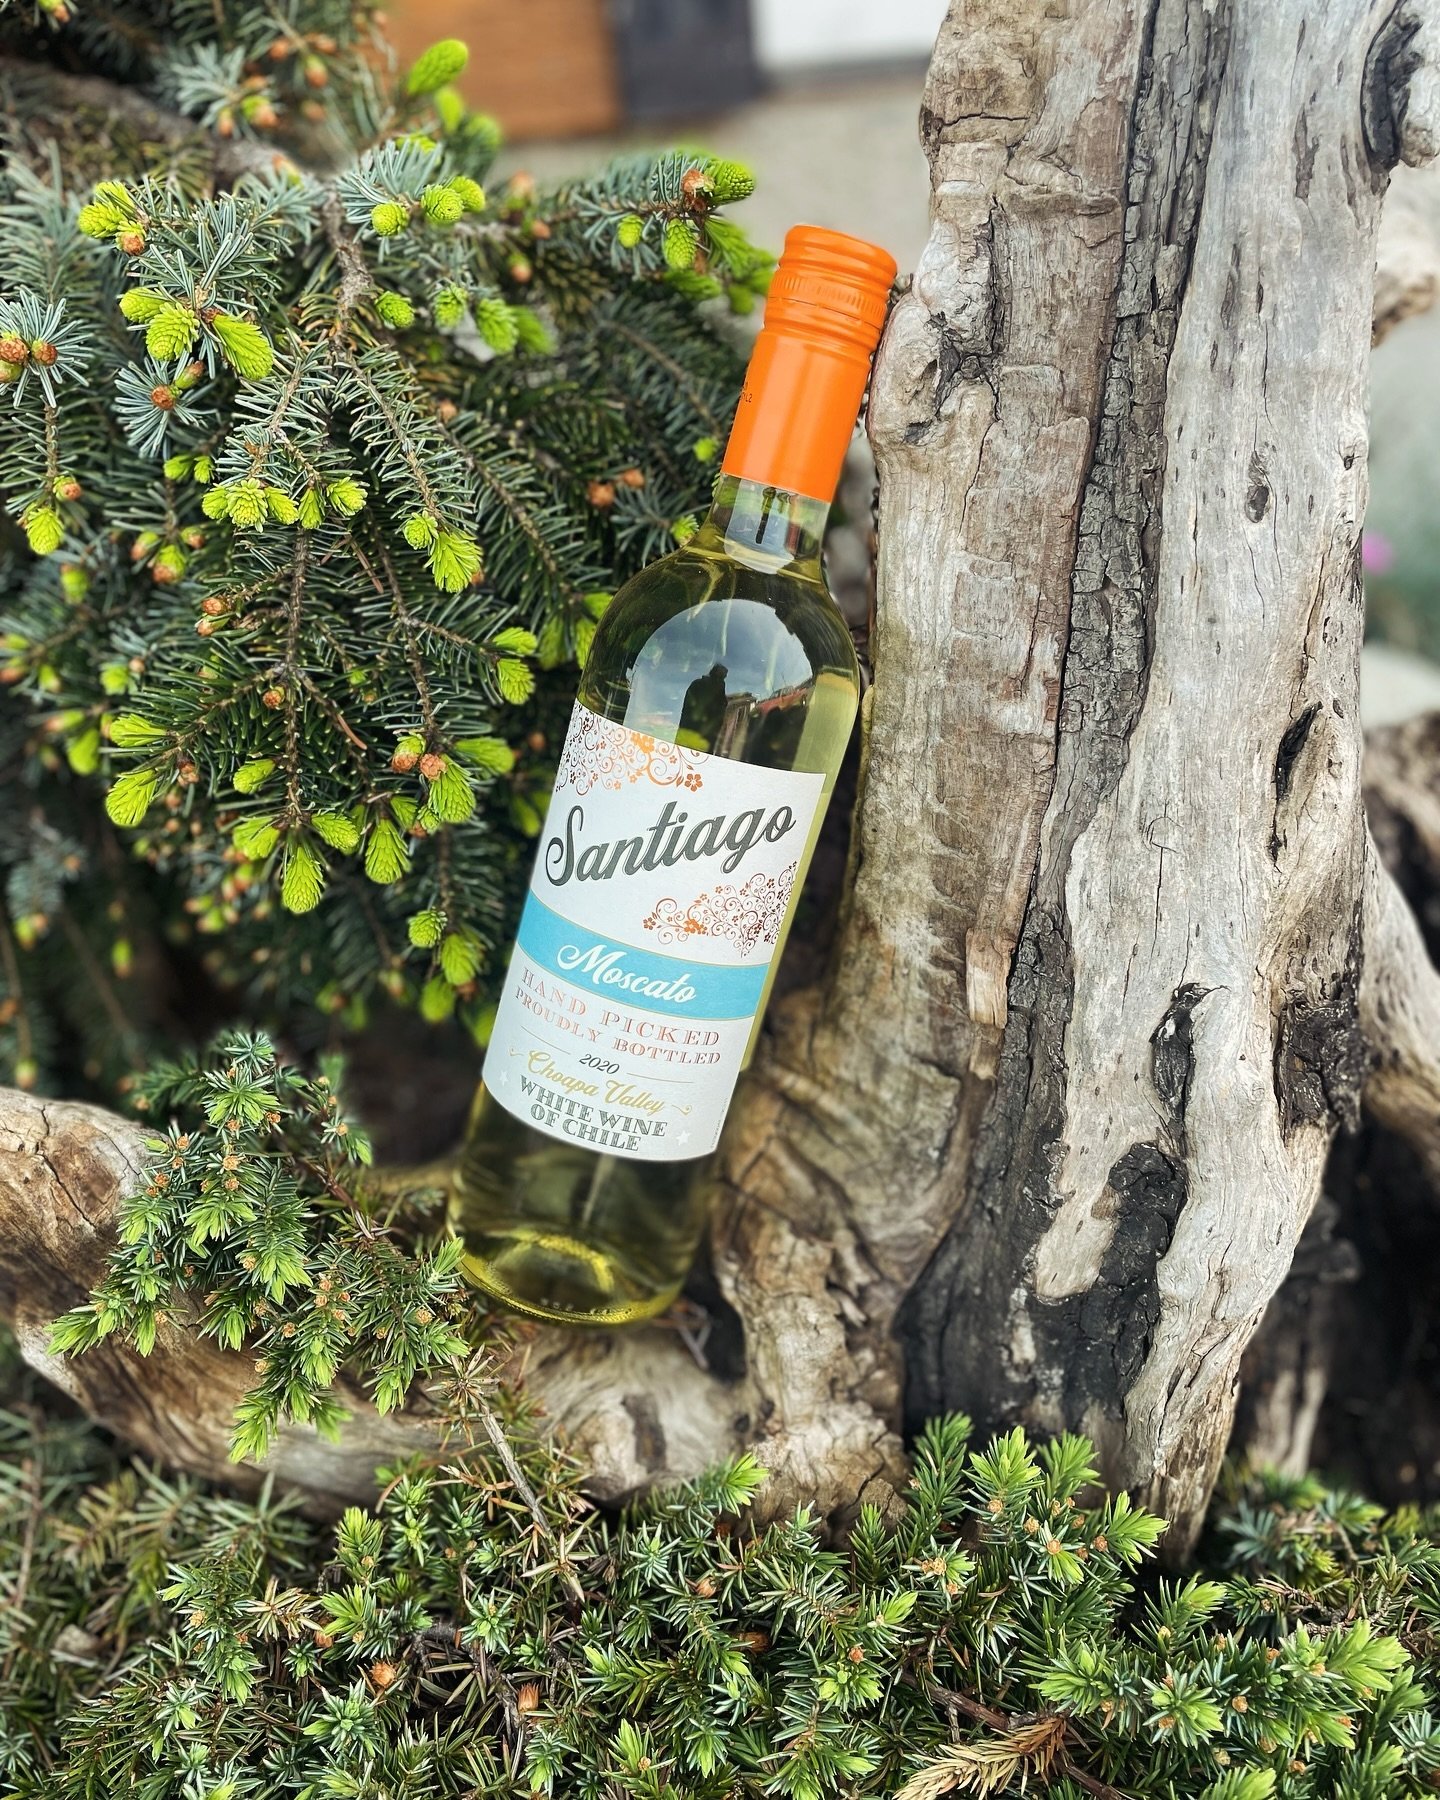 New wine at Railroad! Santiago Moscato&mdash;Made using grapes grown in the Choapa Valley in Chile. Santiago Moscato offers fresh floral notes, with off dry flavors of white peaches and honeycomb, $8. ABV: 12.5%.